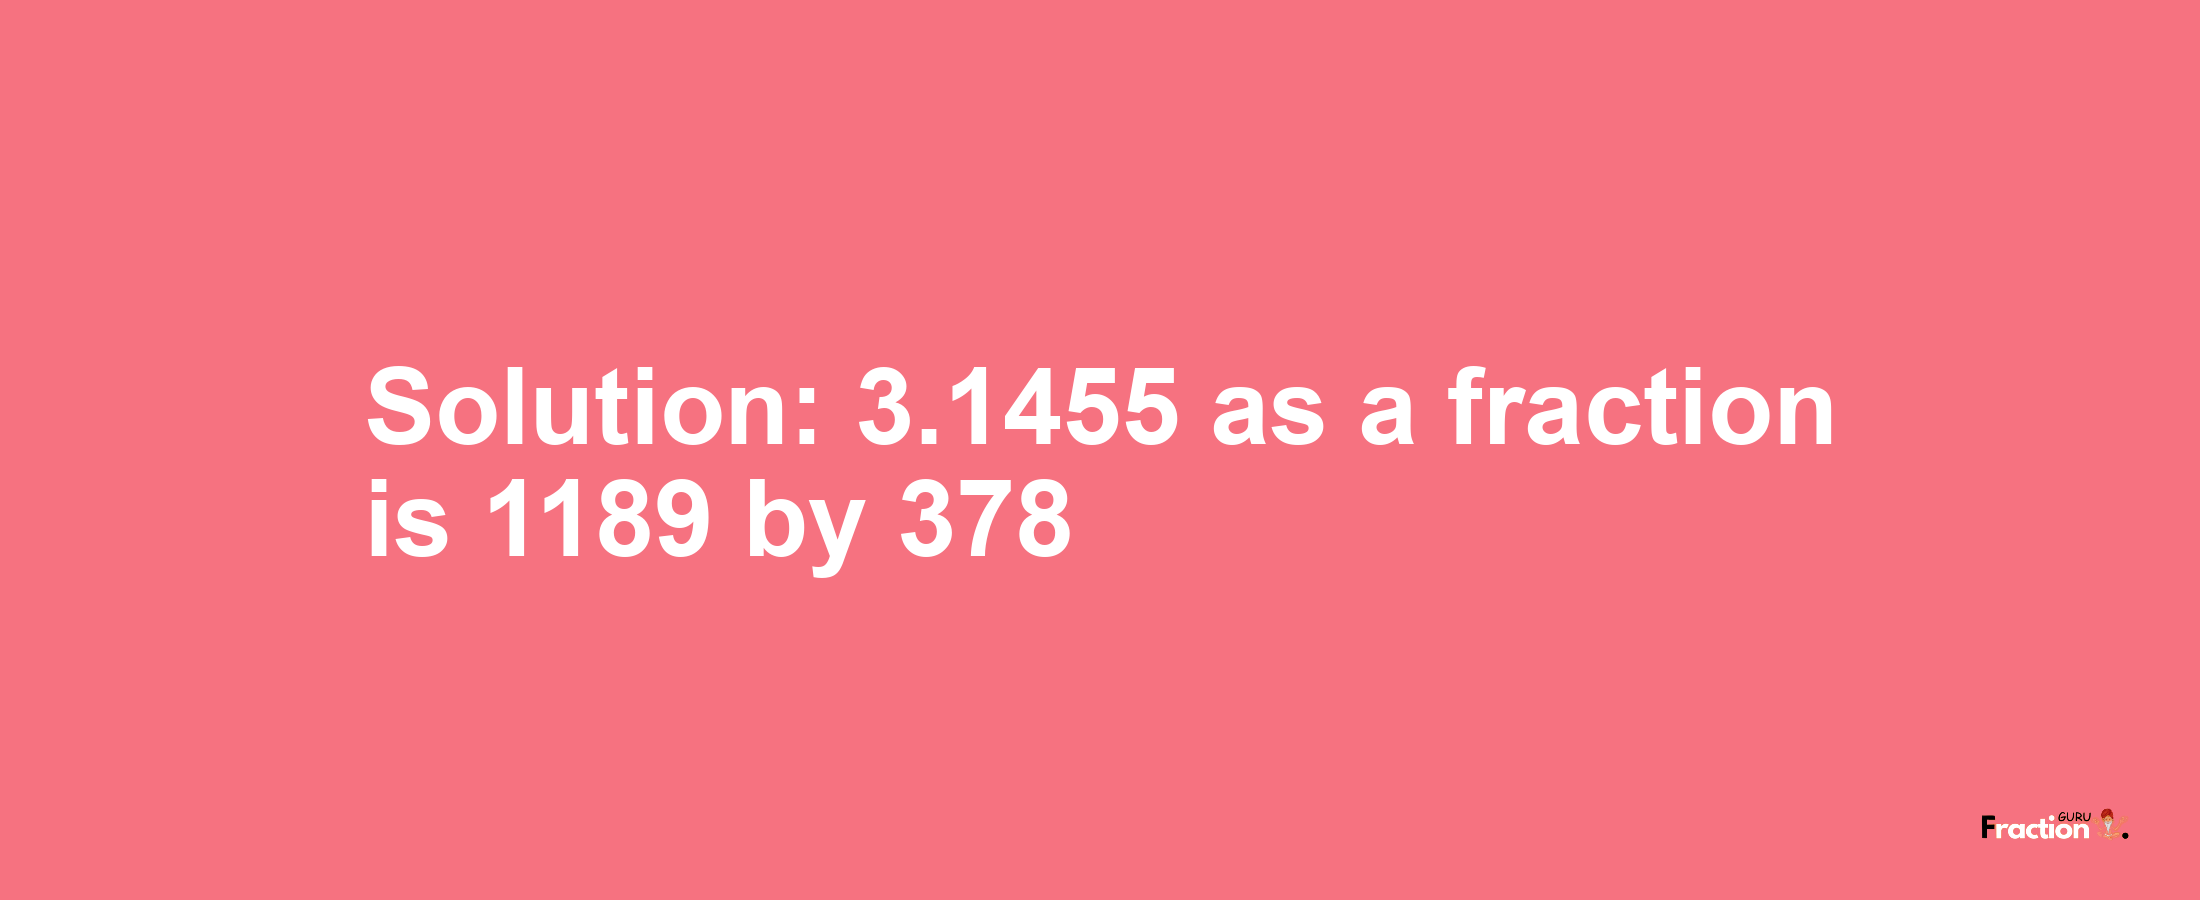 Solution:3.1455 as a fraction is 1189/378